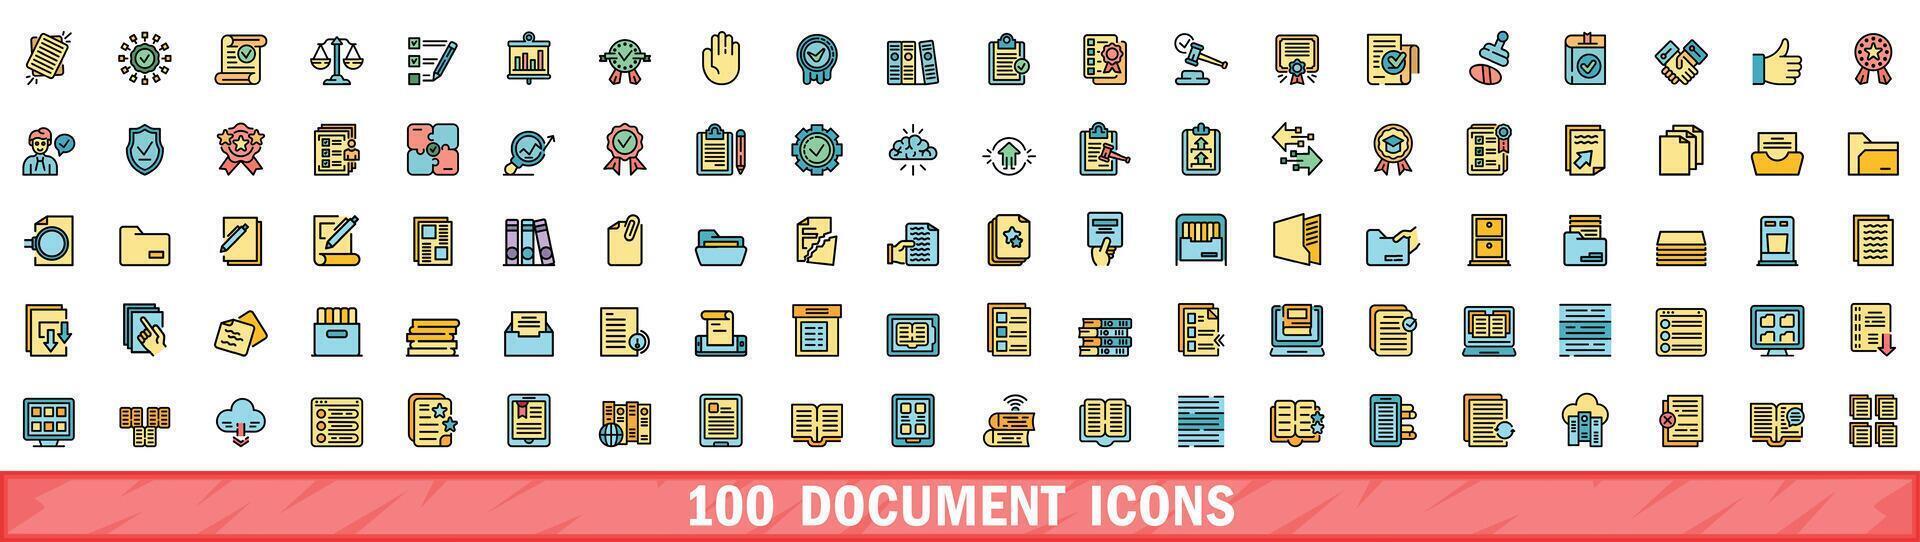 100 document icons set, color line style vector